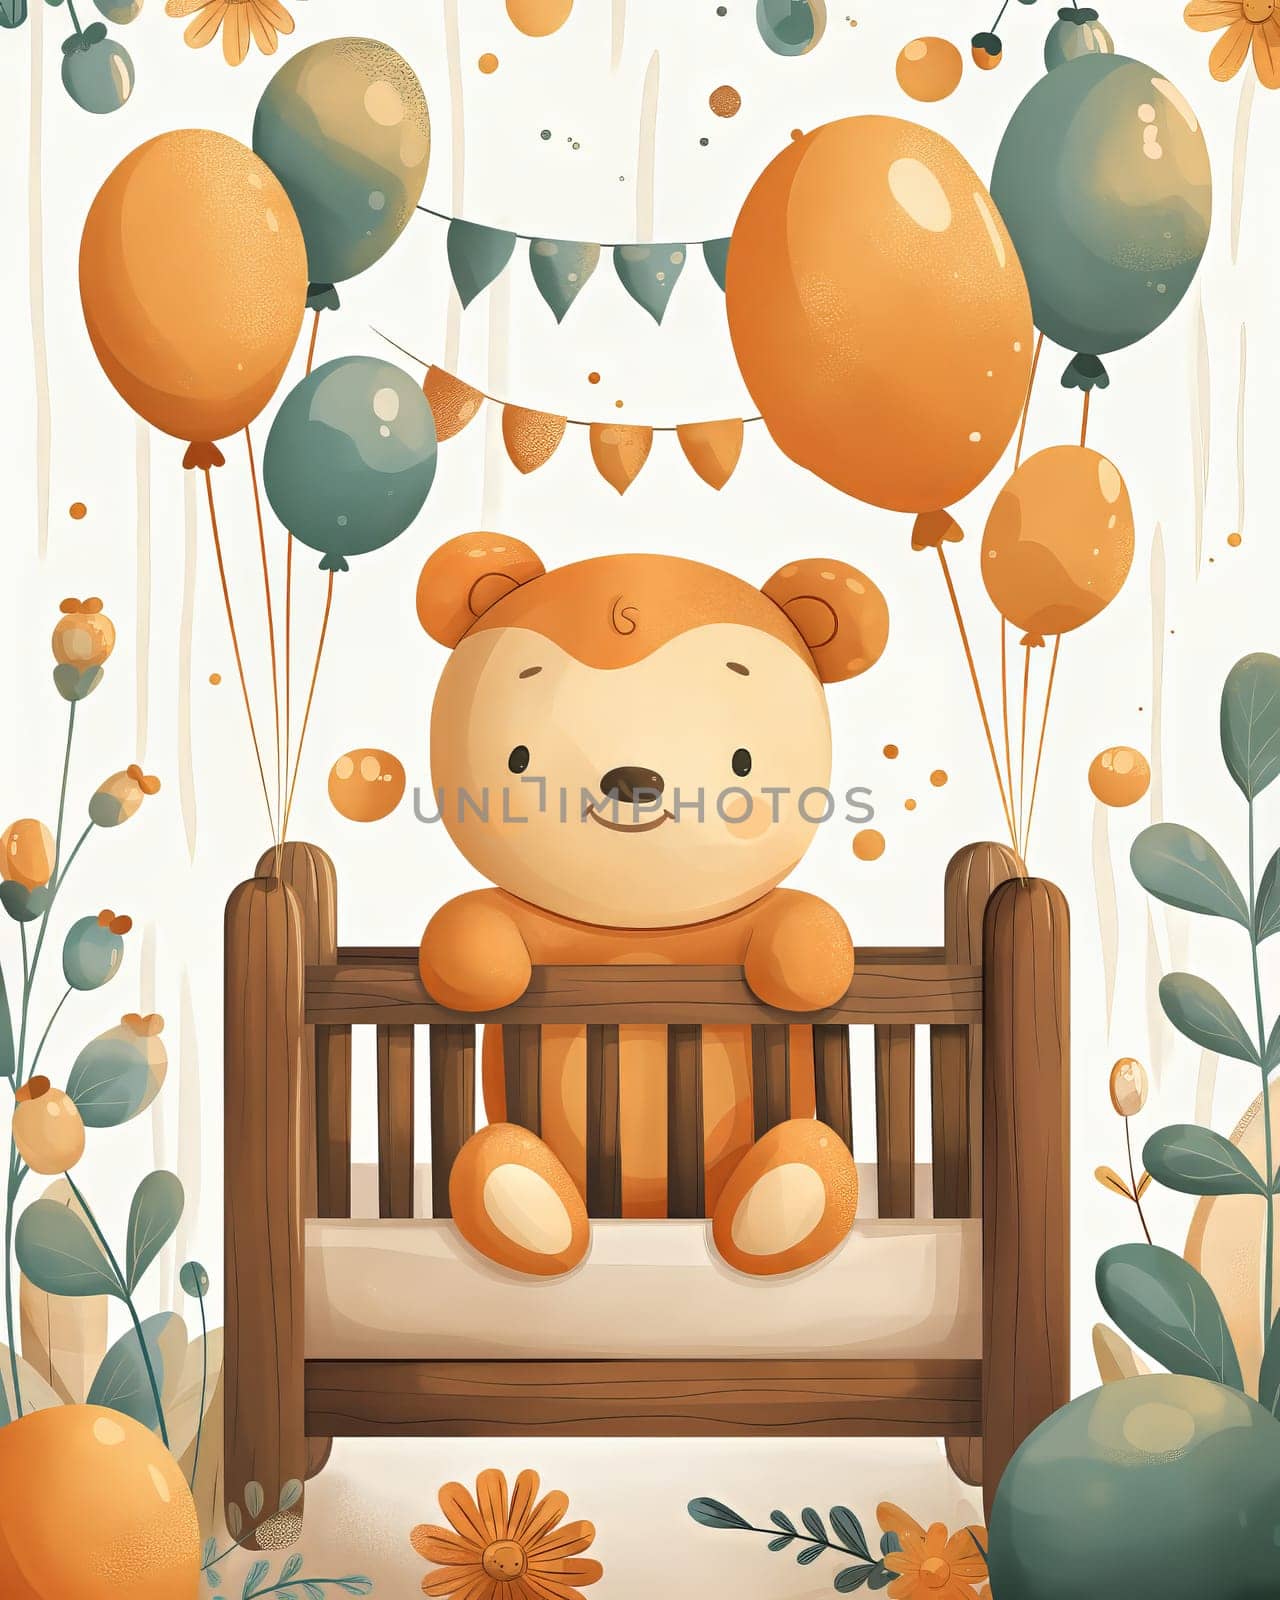 Greeting card, baby crib and congratulation balloons. by Fischeron